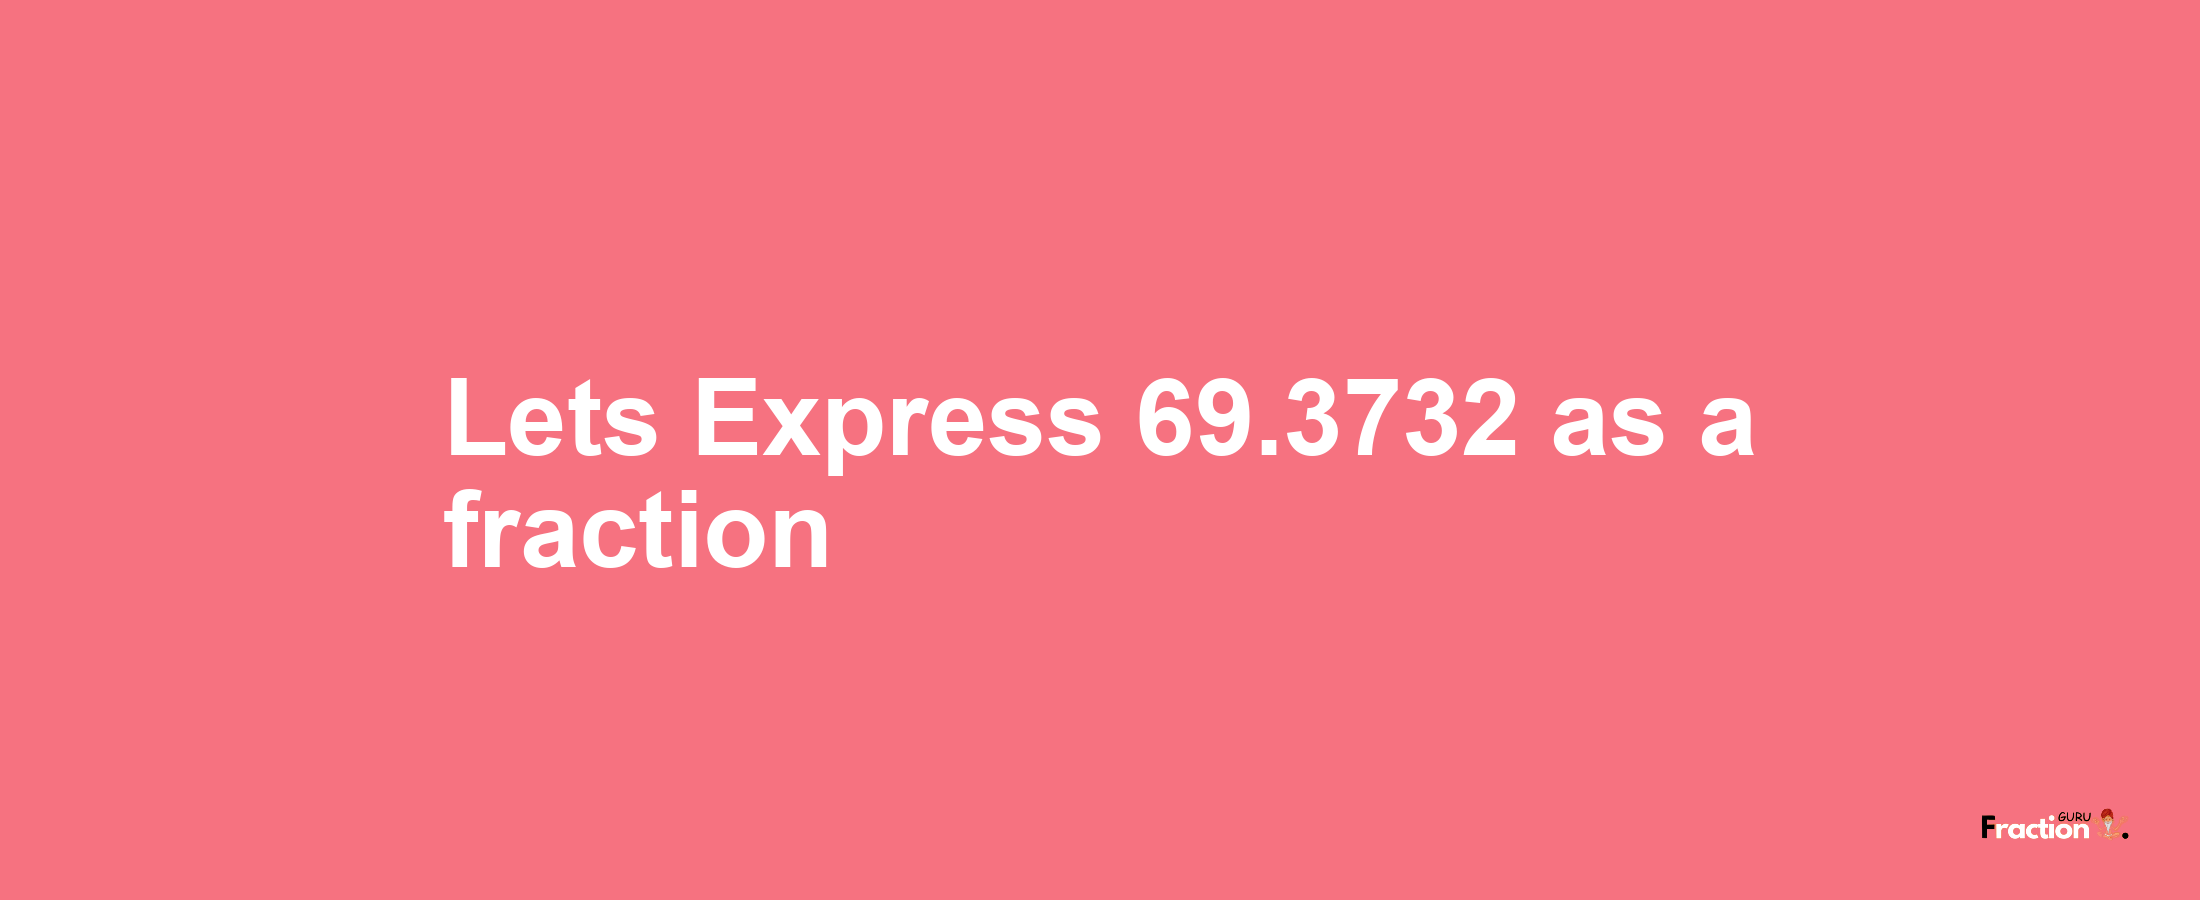 Lets Express 69.3732 as afraction